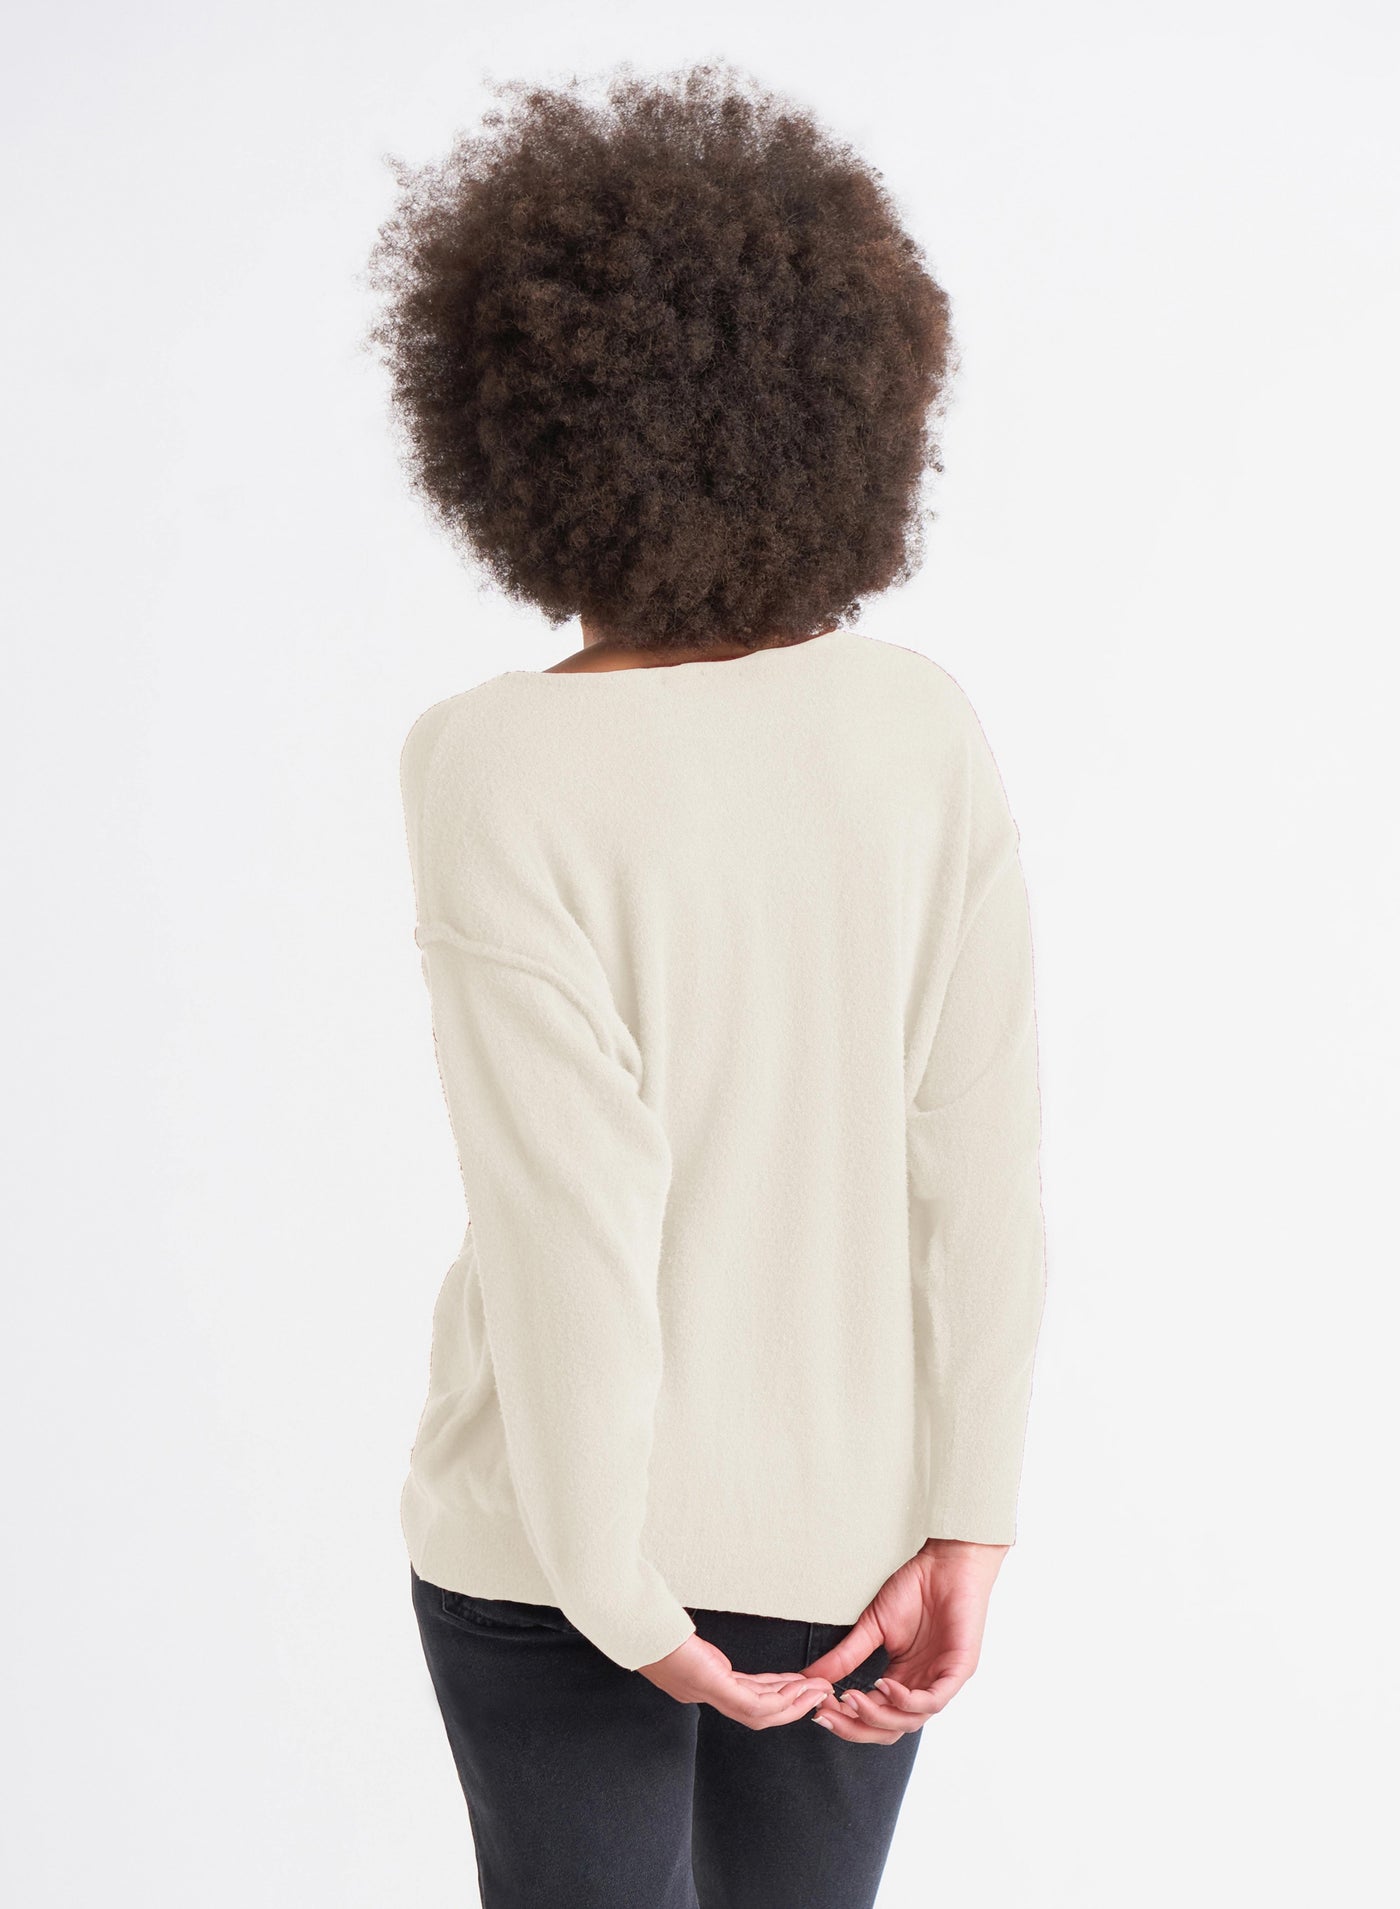 Ultra Soft V Neck Sweater - 2 colors available